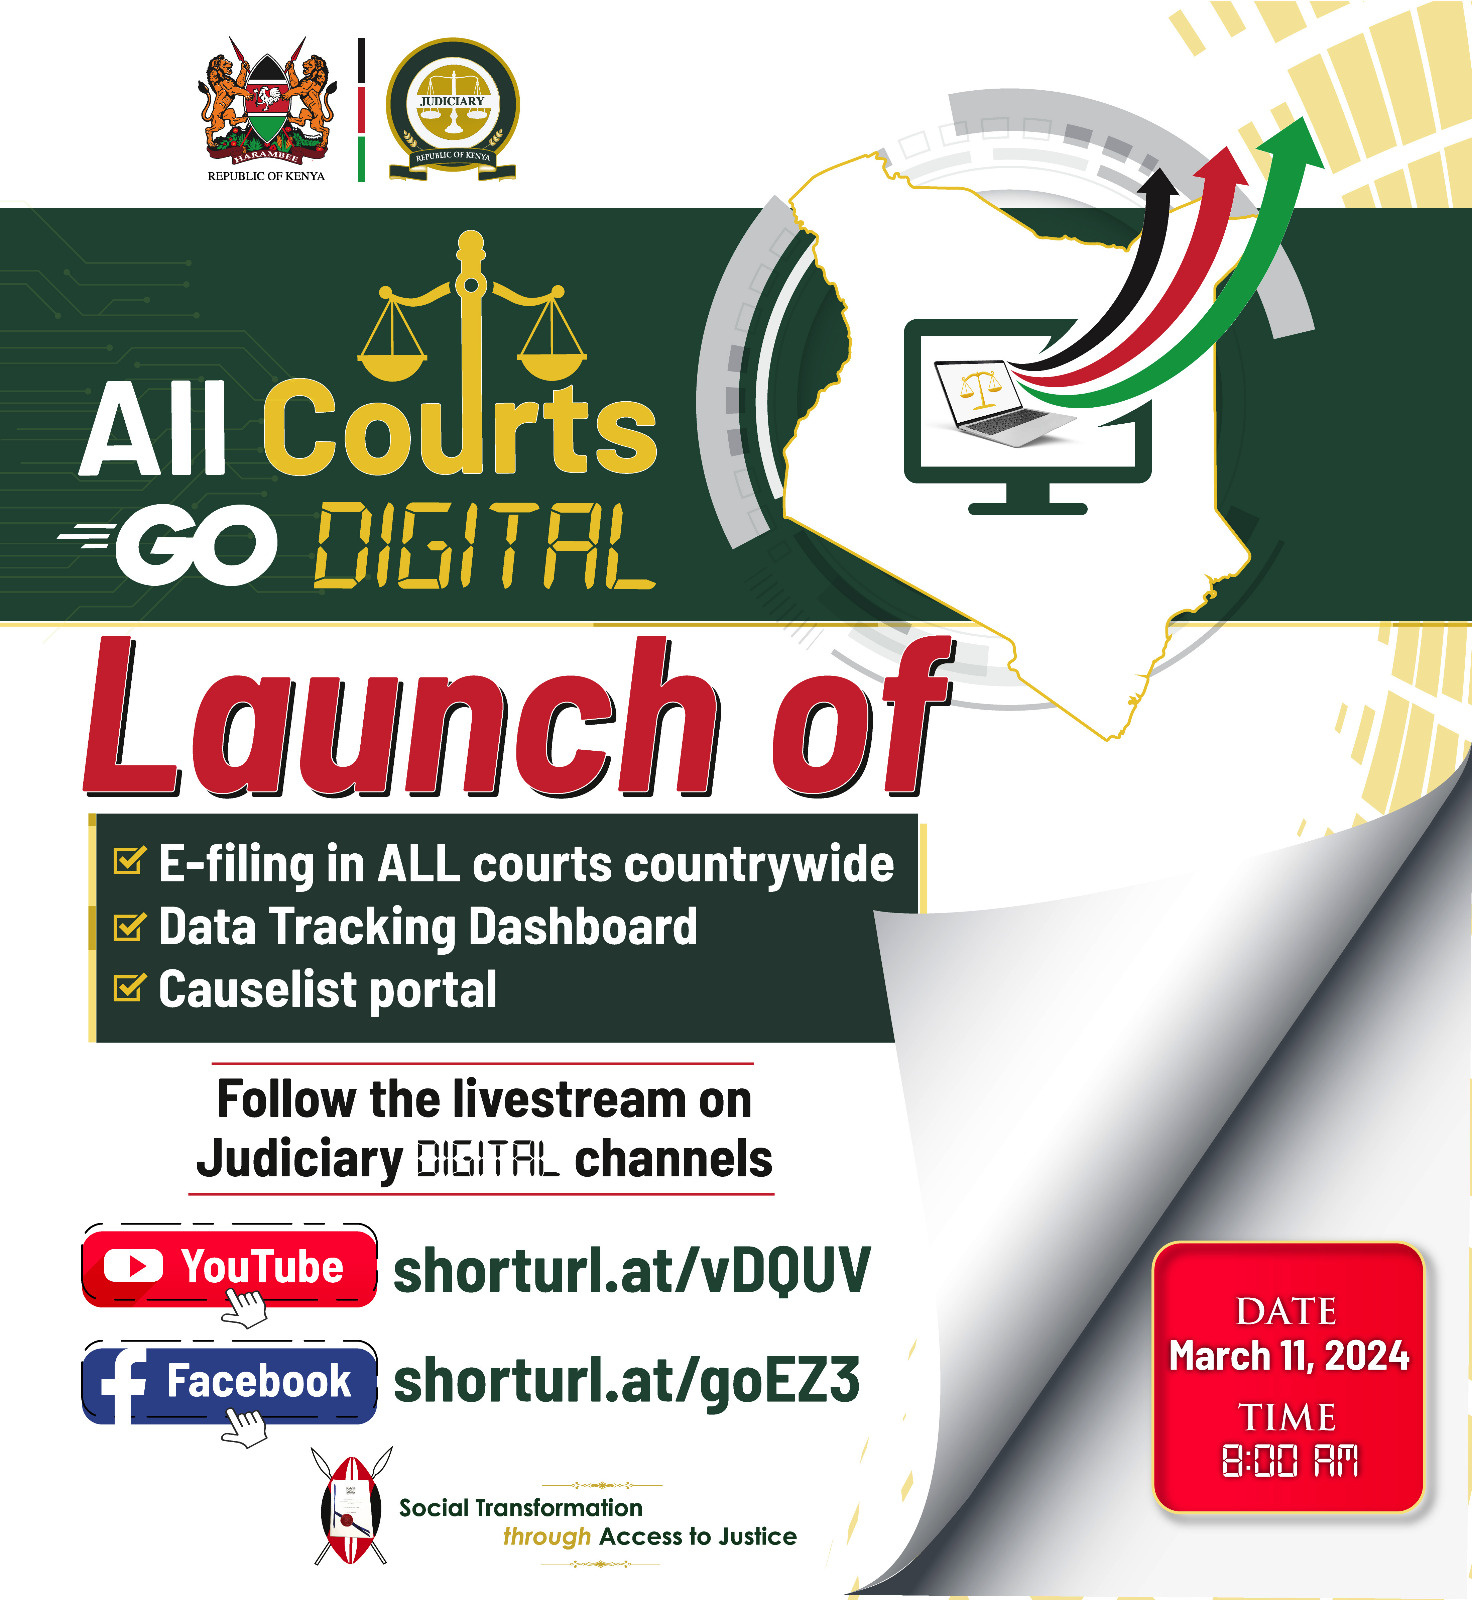 All Courts in the country to go digital